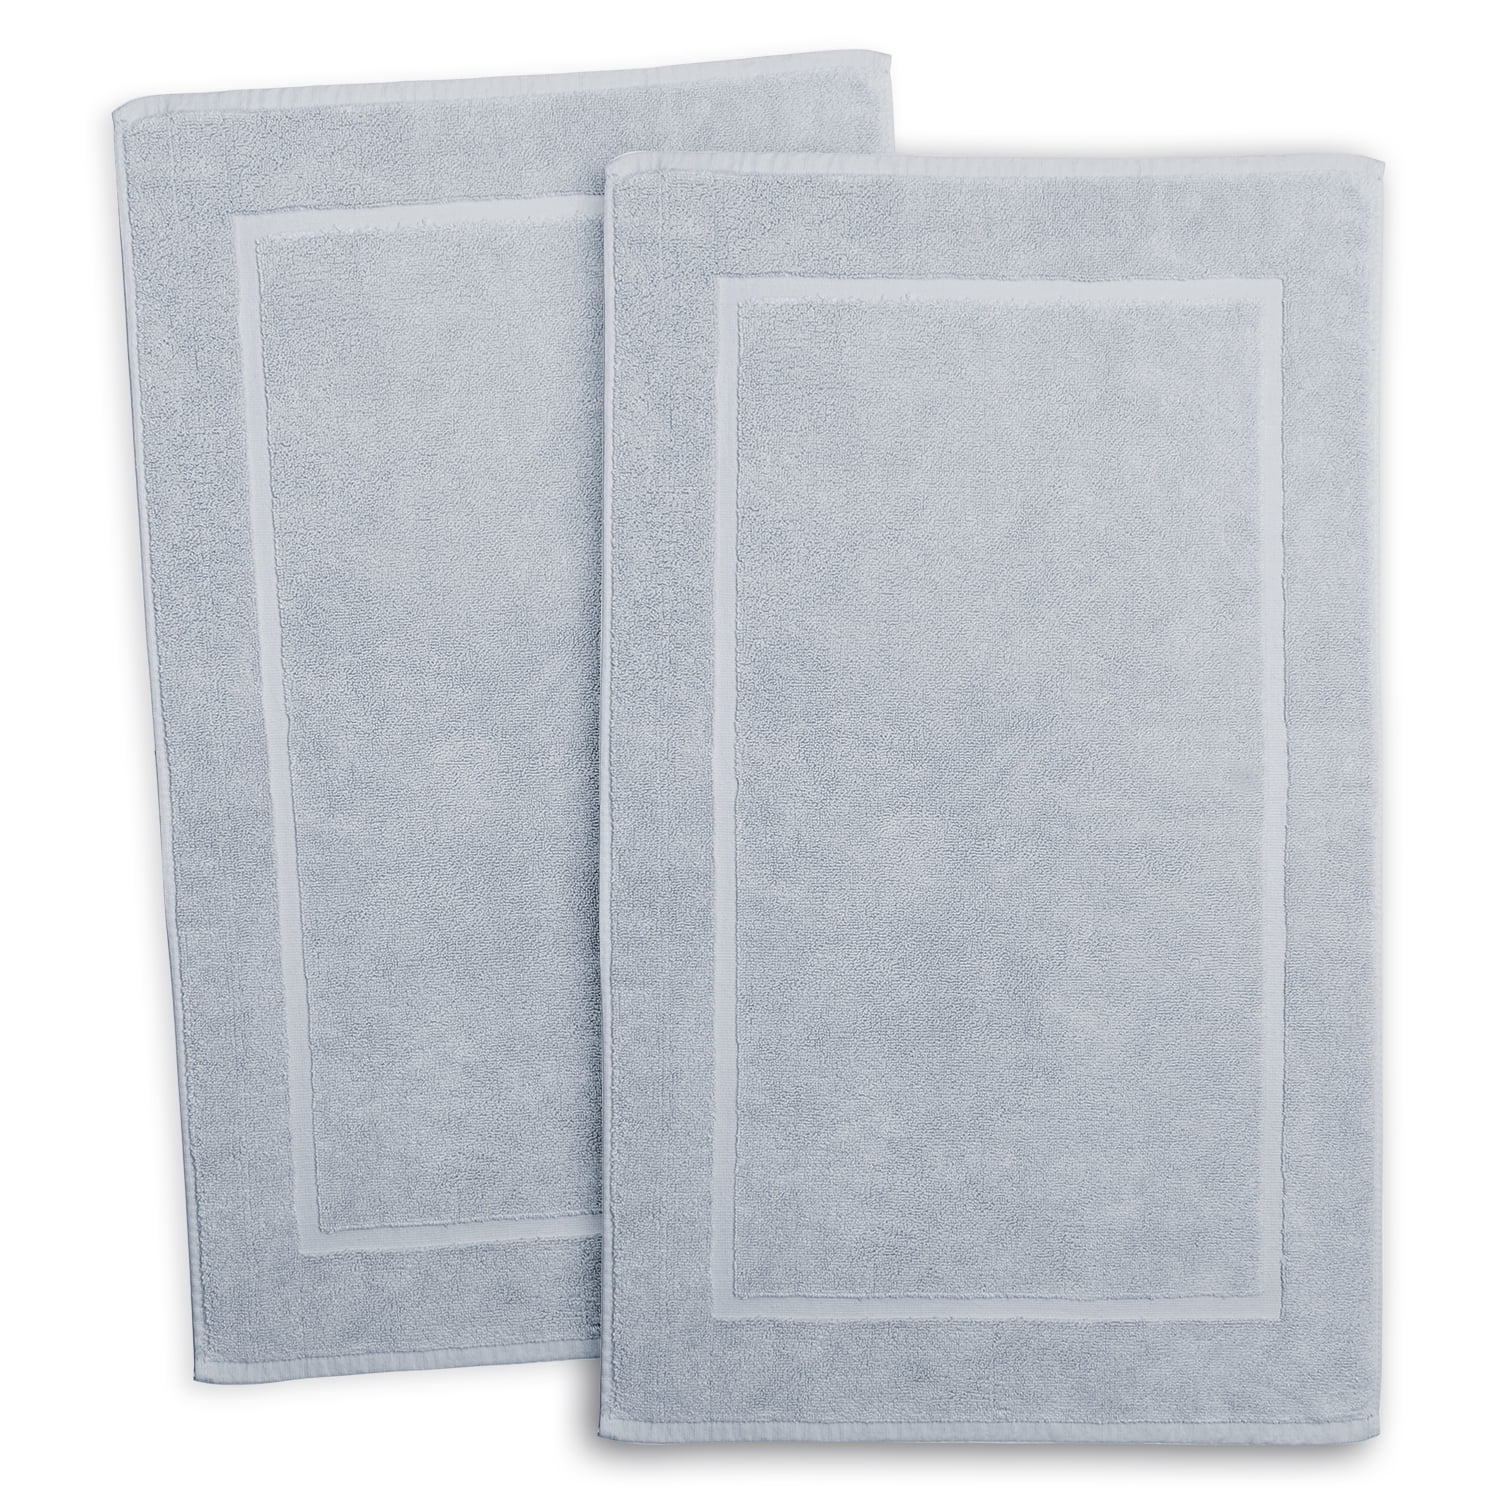 Hearth & Harbor 100 Percent Cotton Ultra Soft and Absorbent Bath Towel Set  - On Sale - Bed Bath & Beyond - 32433347